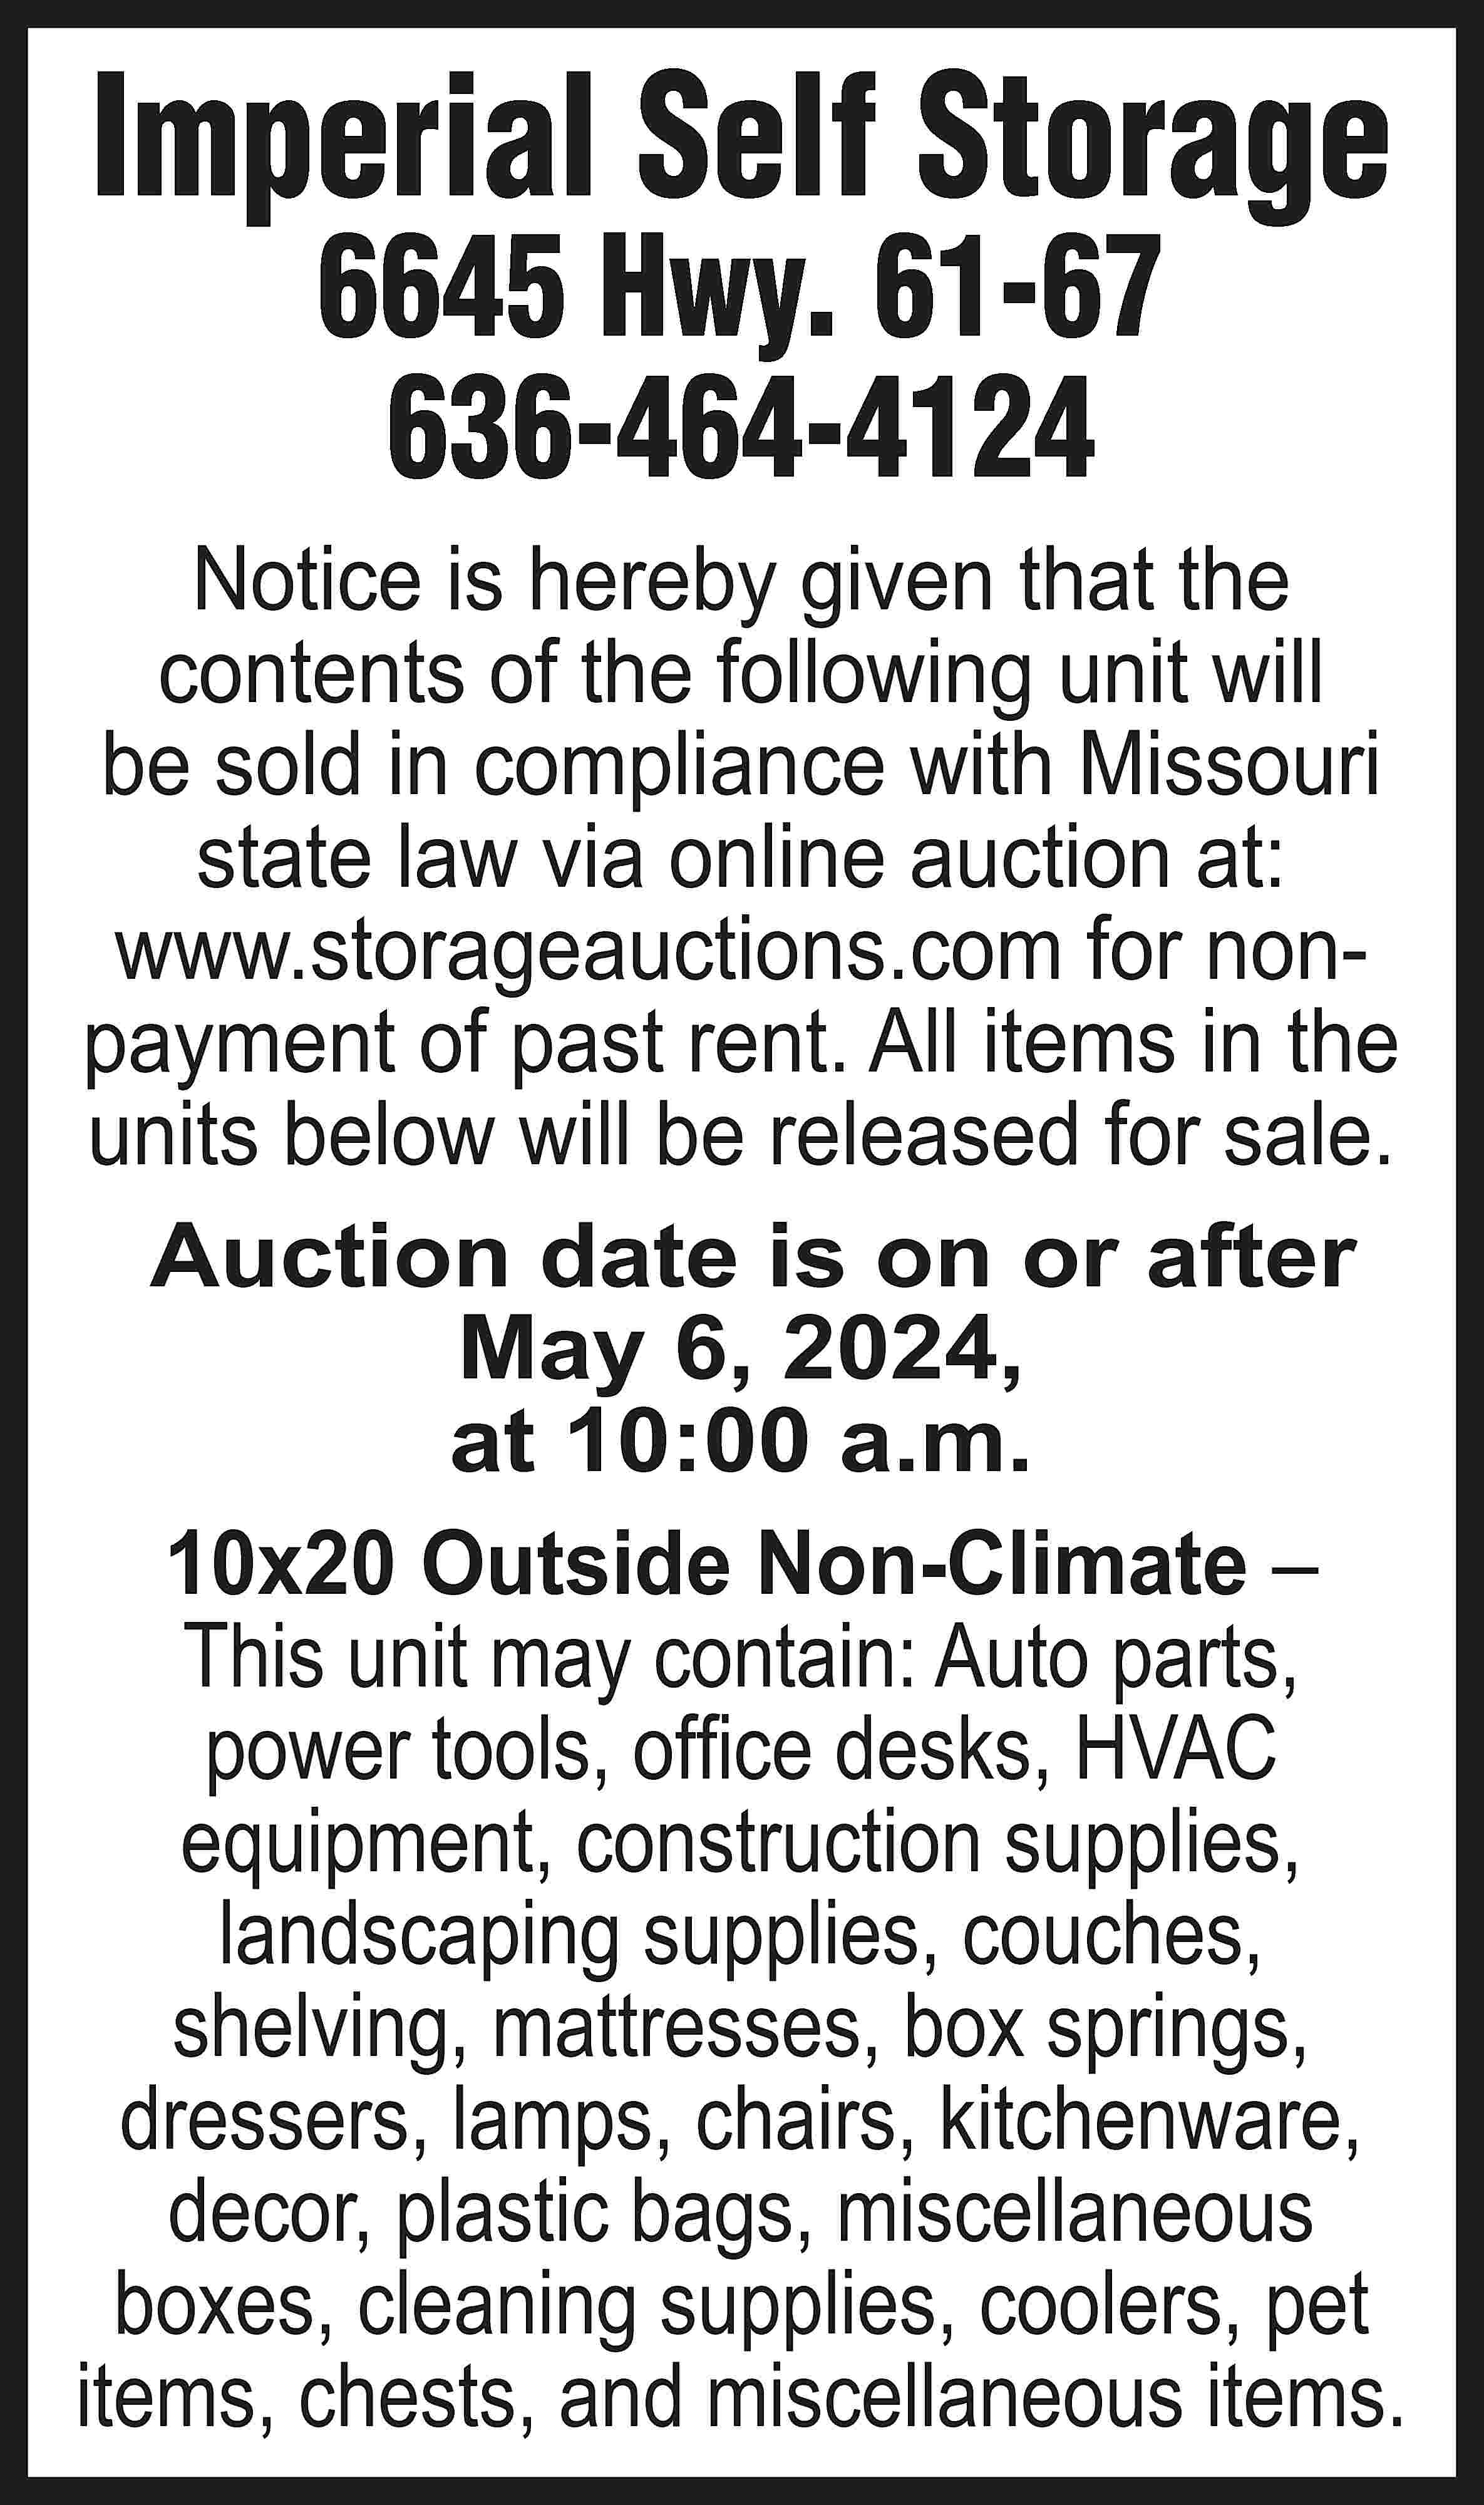 Imperial Self Storage 6645 Hwy.  Imperial Self Storage 6645 Hwy. 61-67 636-464-4124 Notice is hereby given that the contents of the following unit will be sold in compliance with Missouri state law via online auction at: www.storageauctions.com for nonpayment of past rent. All items in the units below will be released for sale. Auction date is on or after May 6, 2024, at 10:00 a.m. 10x20 Outside Non-Climate – This unit may contain: Auto parts, power tools, office desks, HVAC equipment, construction supplies, landscaping supplies, couches, shelving, mattresses, box springs, dressers, lamps, chairs, kitchenware, decor, plastic bags, miscellaneous boxes, cleaning supplies, coolers, pet items, chests, and miscellaneous items.